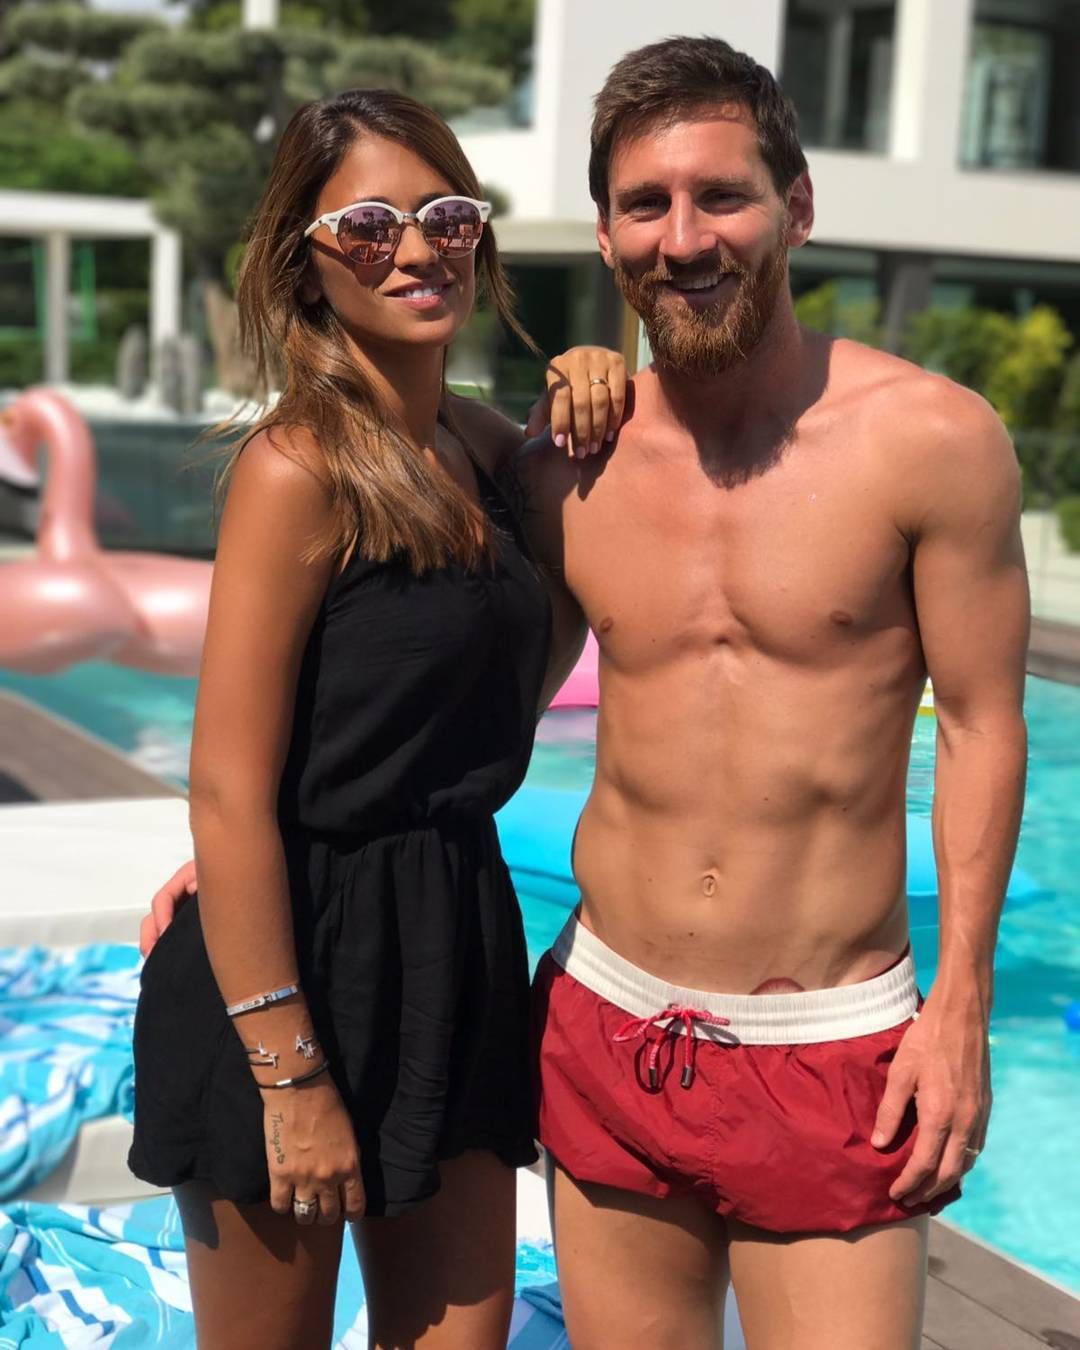 Lionel Messi and his wife Antonella Roccuzzo have known each other since they were children.